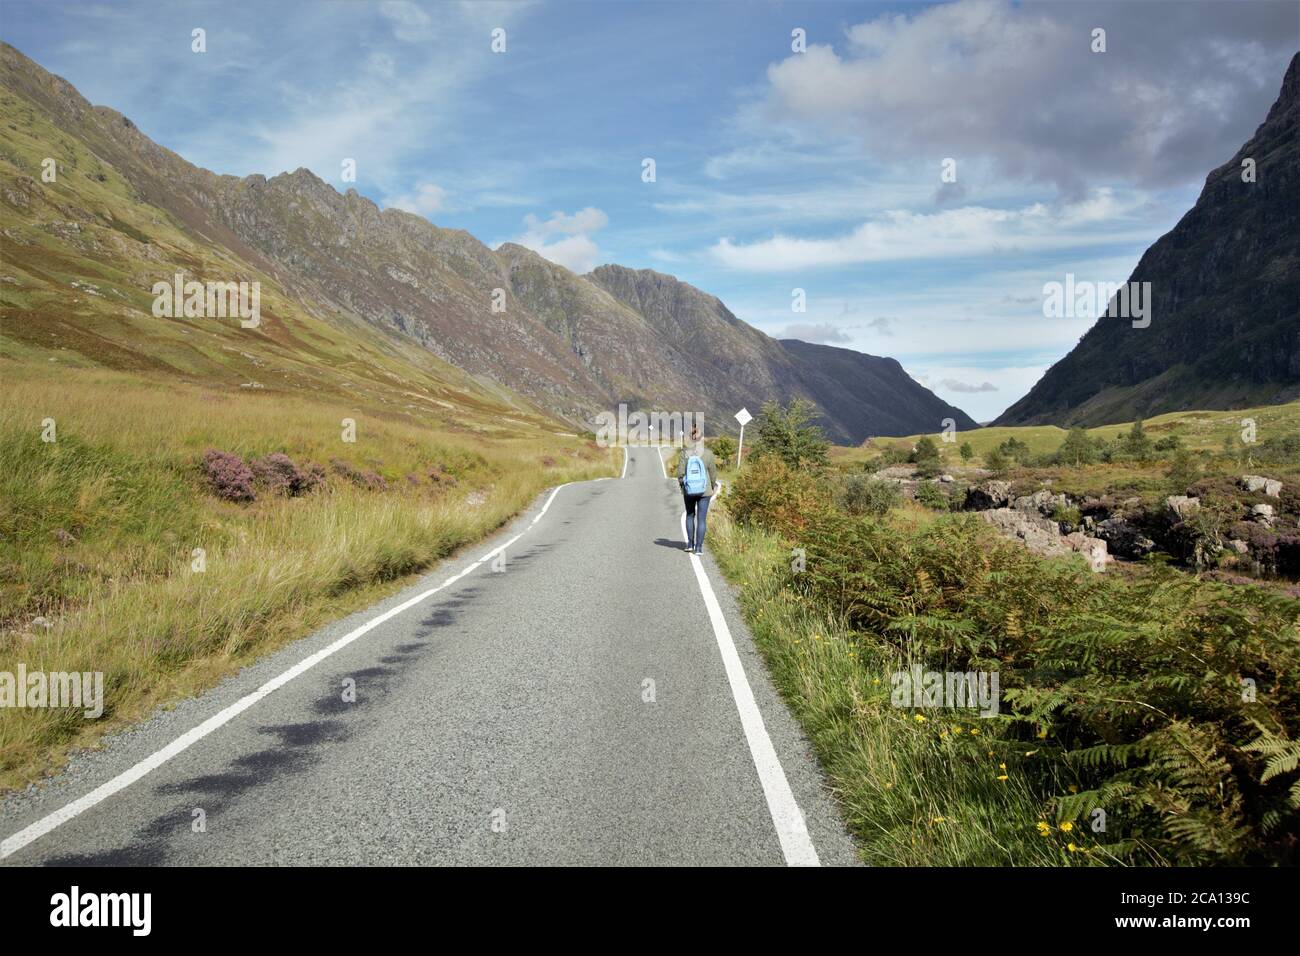 A young girl walking along the road with her backpack in Glencoe in Scottish Highlands in Summer, Scotland, Great Britain Stock Photo